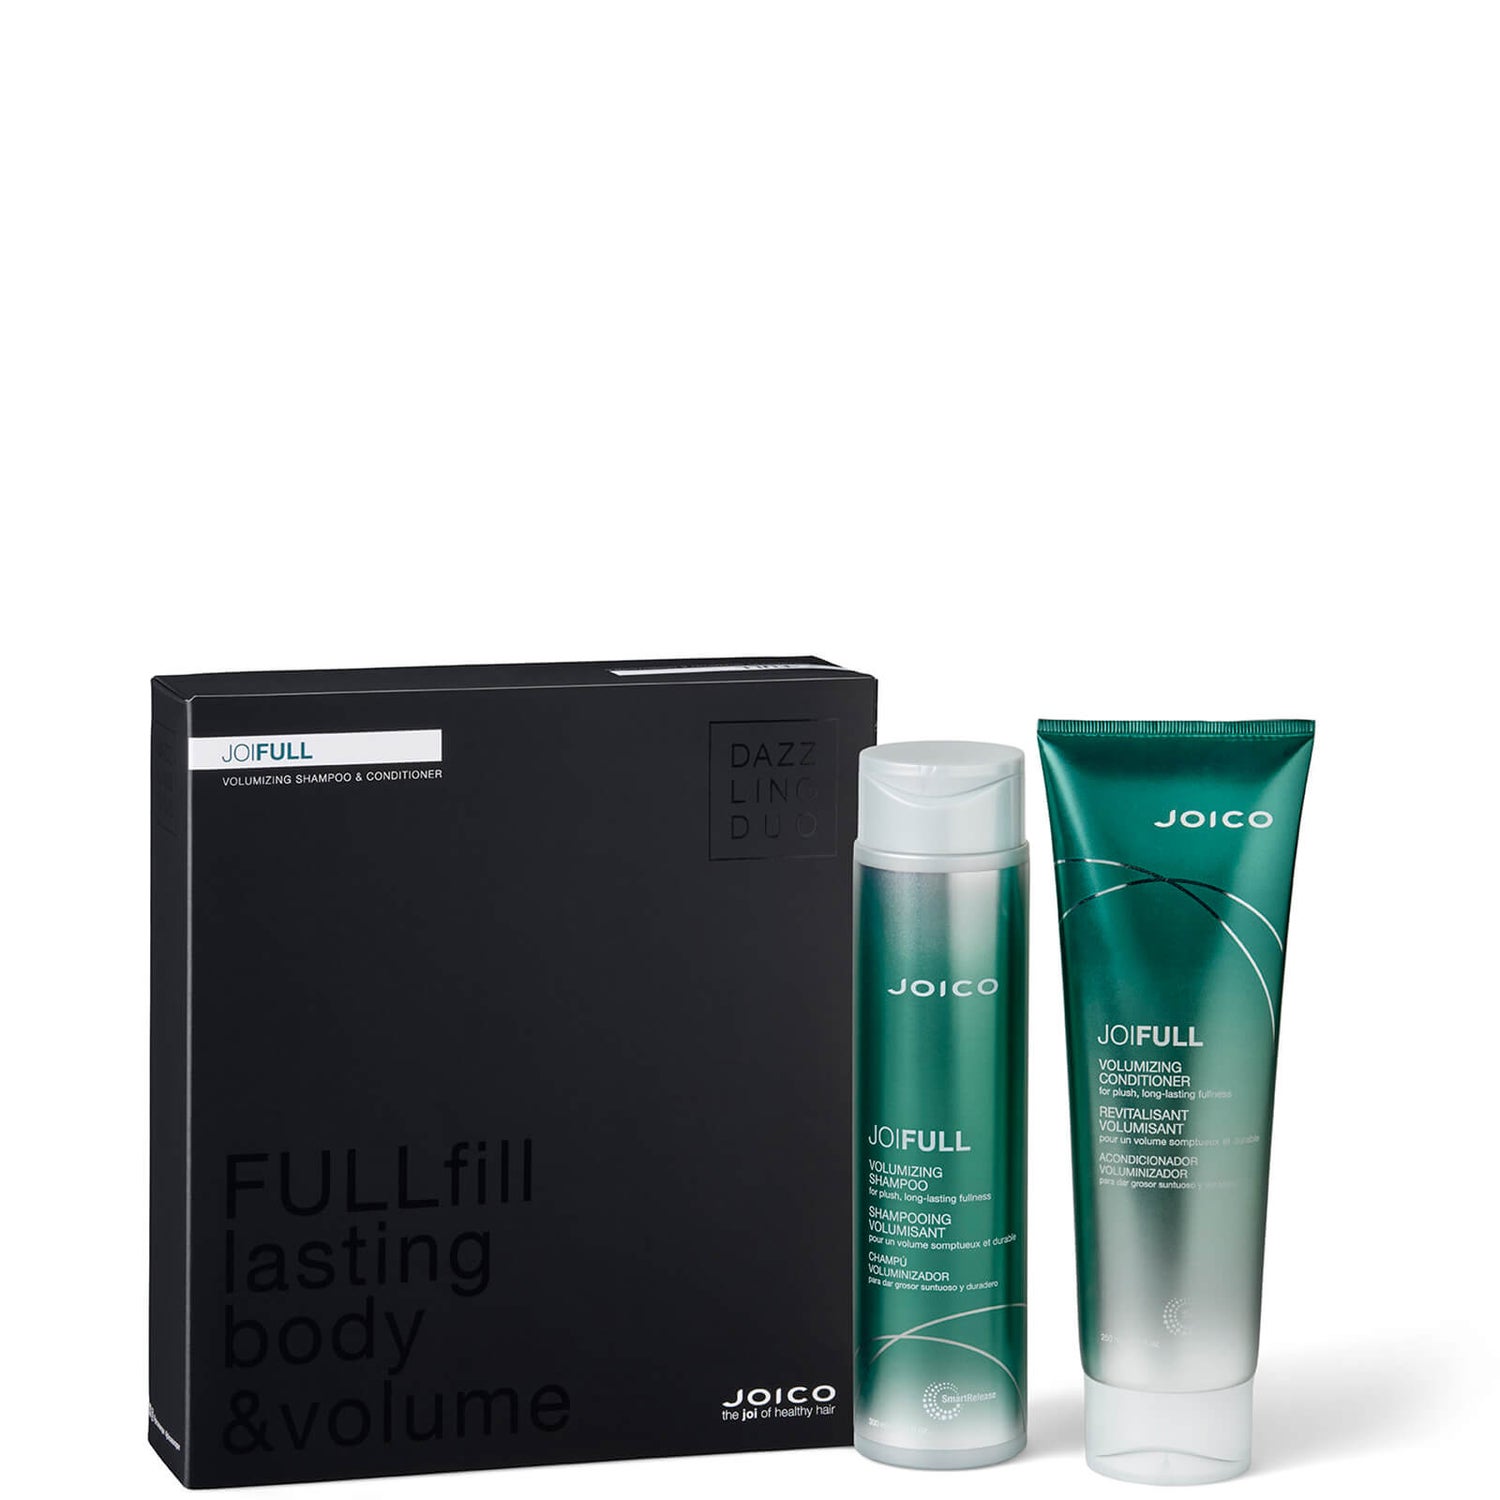 JOICO JoiFull Shampoo and Conditioner Dazzling Duo(조이코 조이풀 샴푸 앤 컨디셔너 대즐링 듀오)